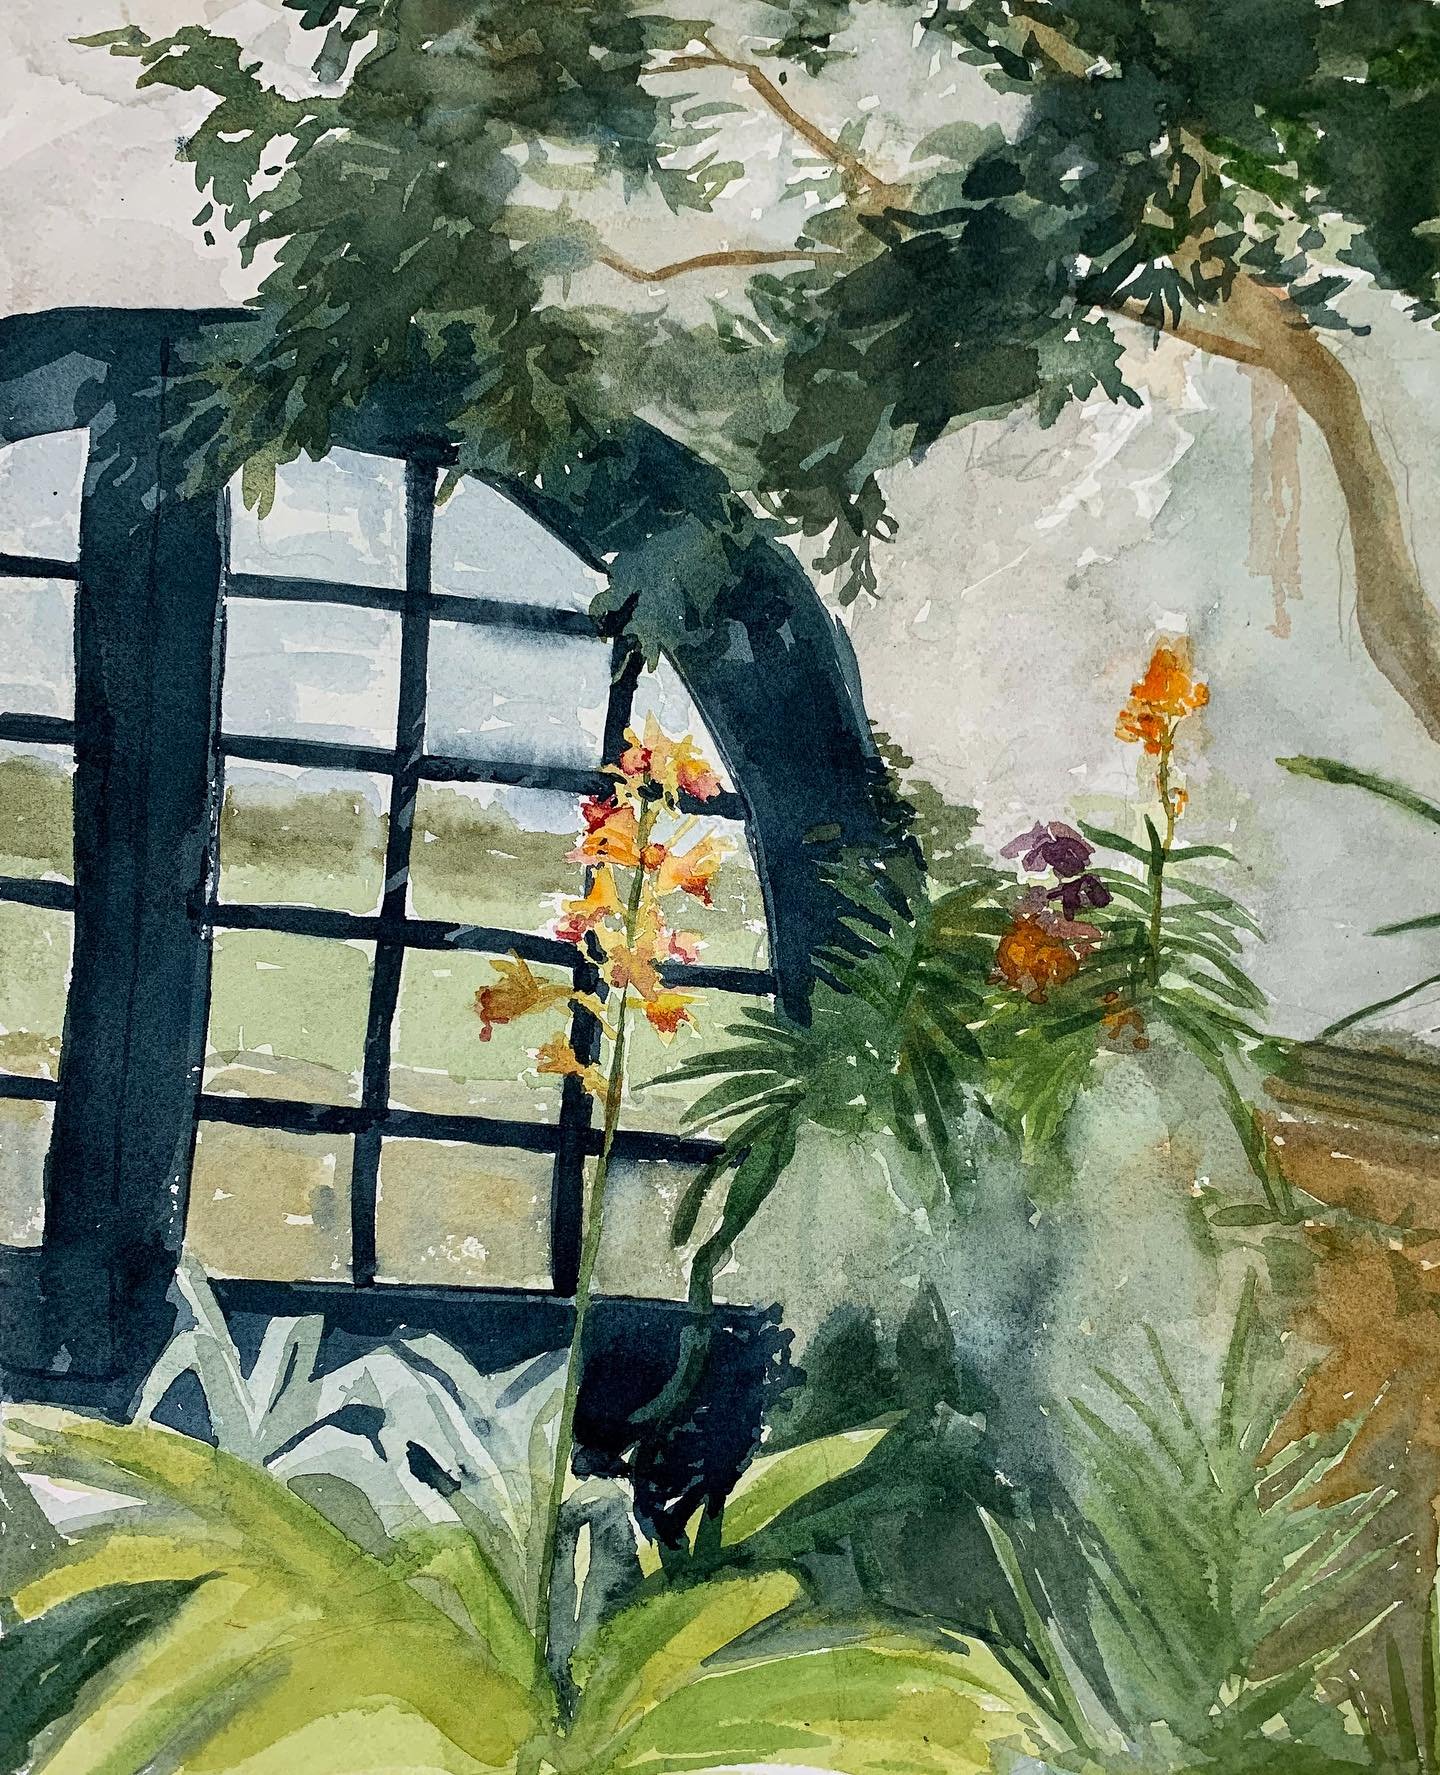 I painted this greenhouse scene a few weeks ago and haven&rsquo;t posted it because I&rsquo;m still not sure how I feel about it. All the greens were delightful&mdash;a common color thread in my recent work, I&rsquo;m finding. It&lsquo;s a little won